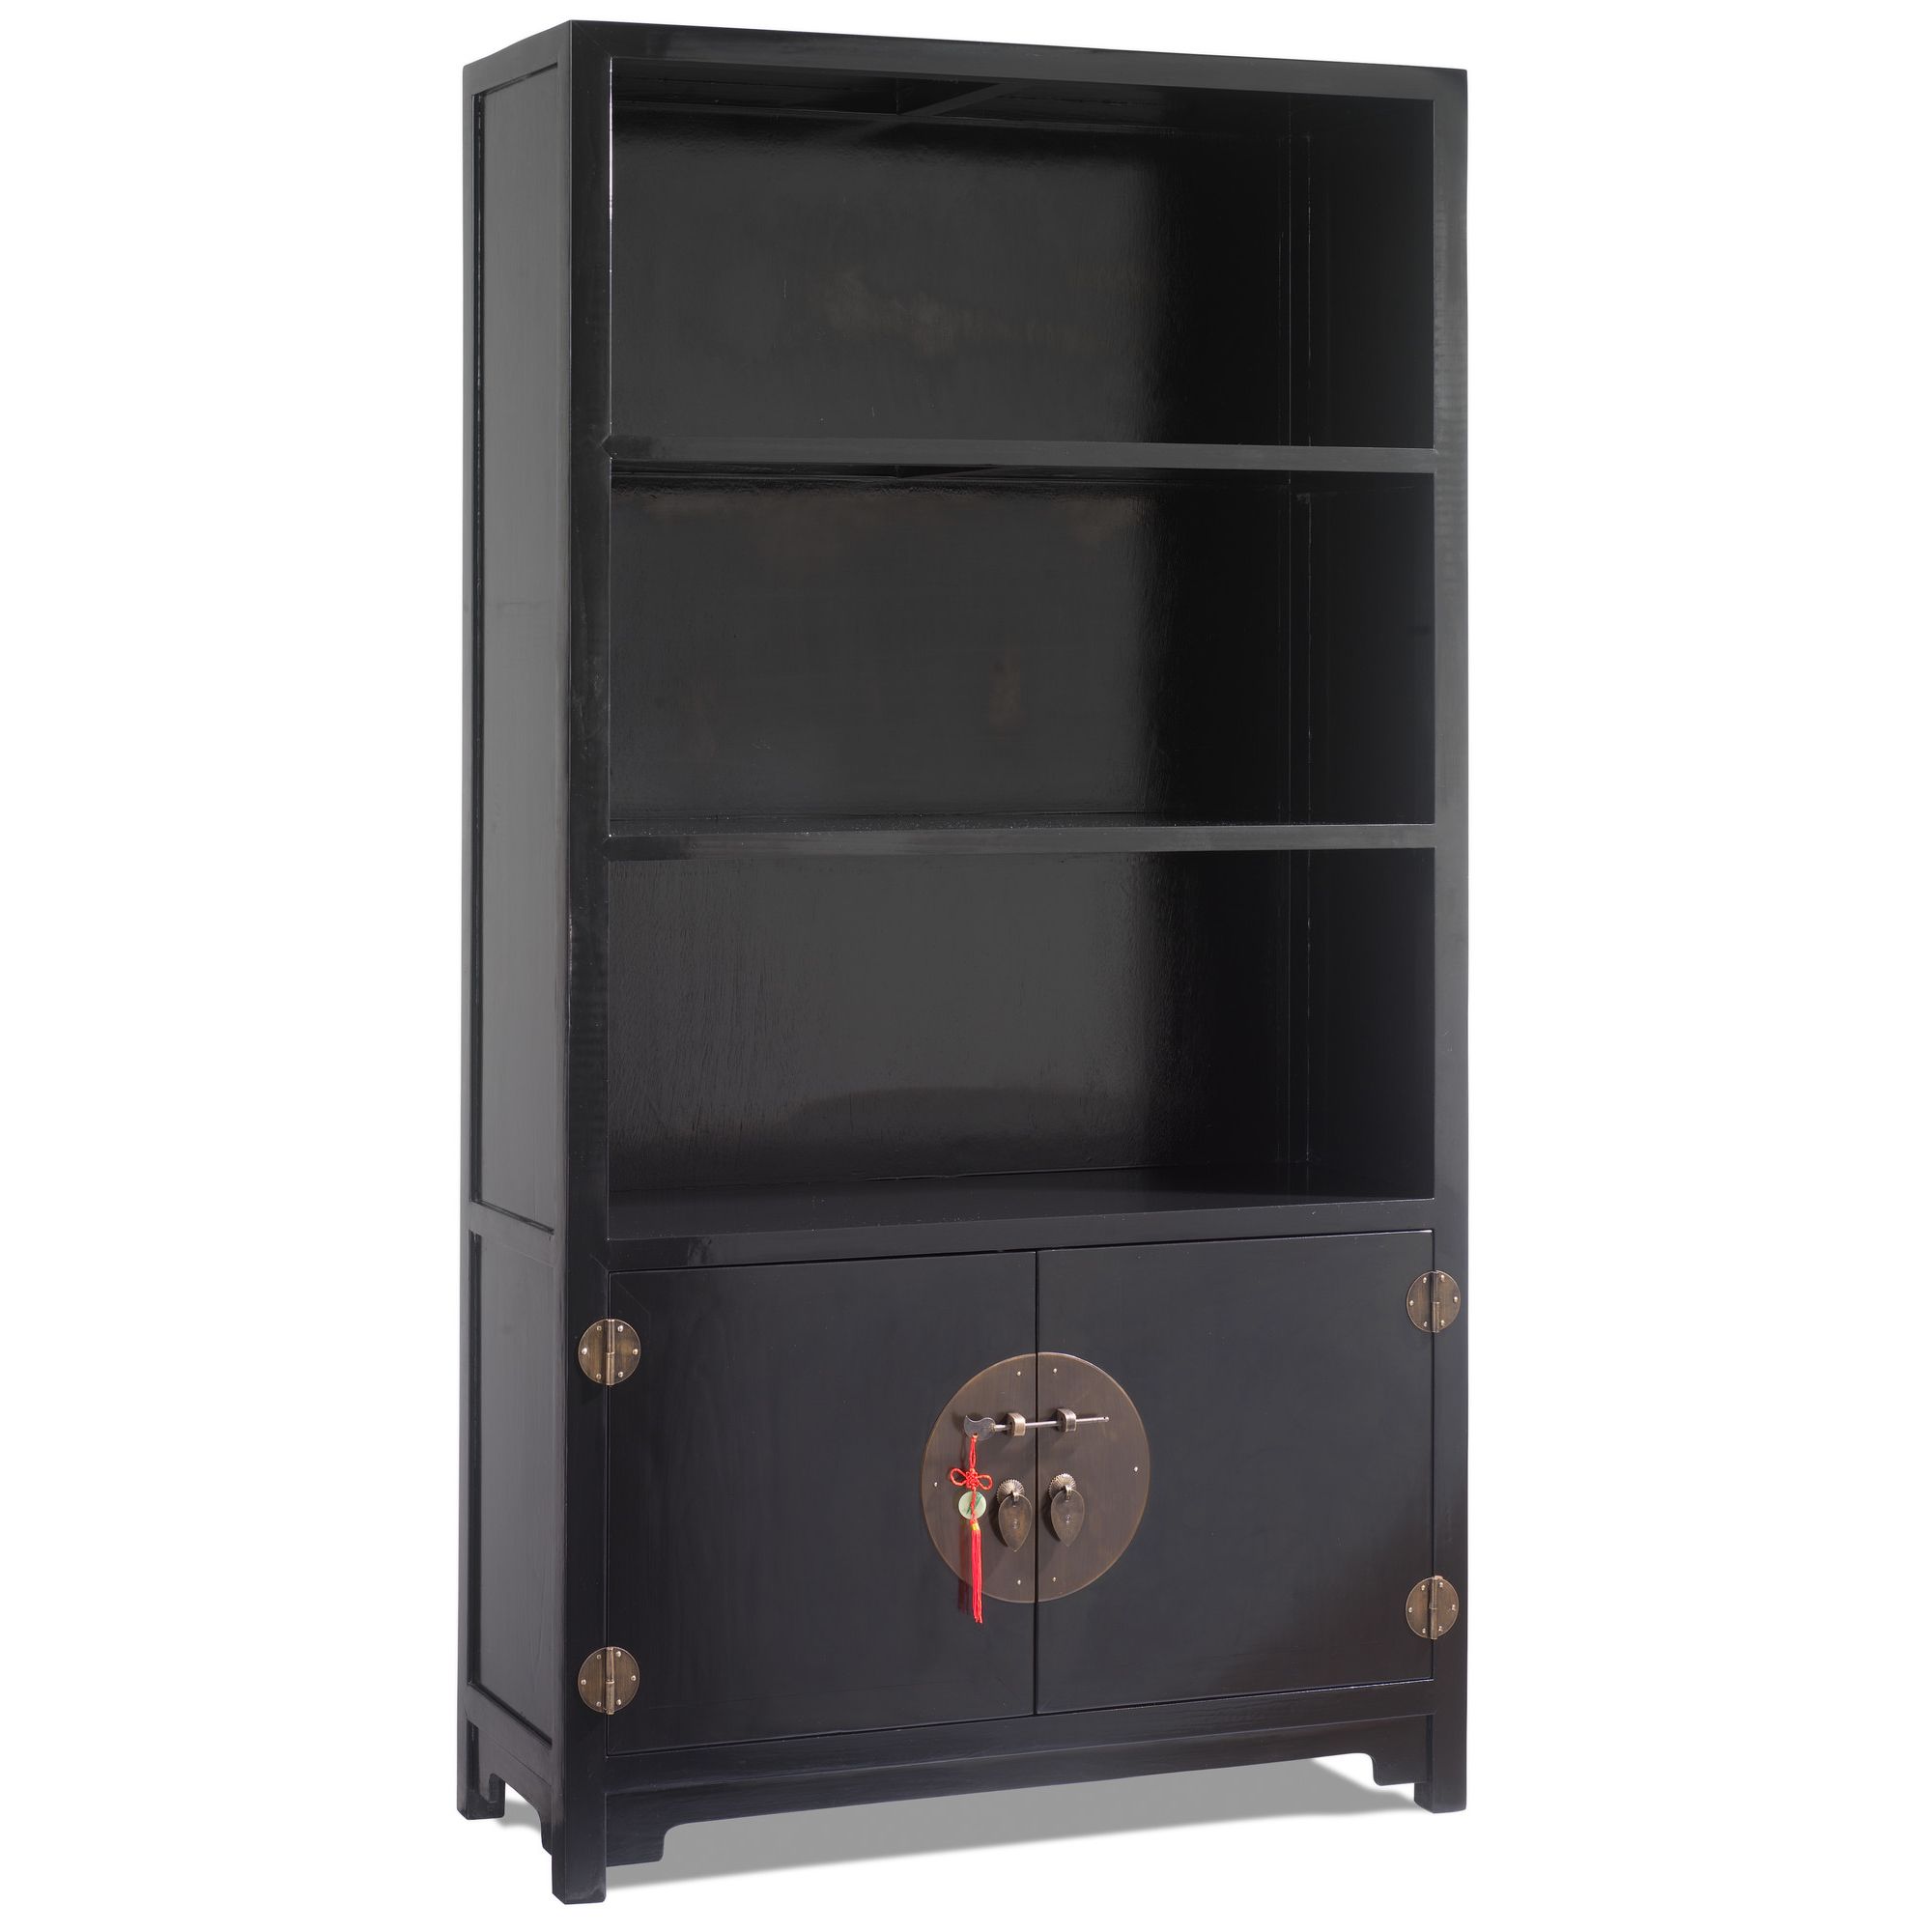 Shimu Chinese Classical Book Cabinet - Black Lacquer at Tesco Direct